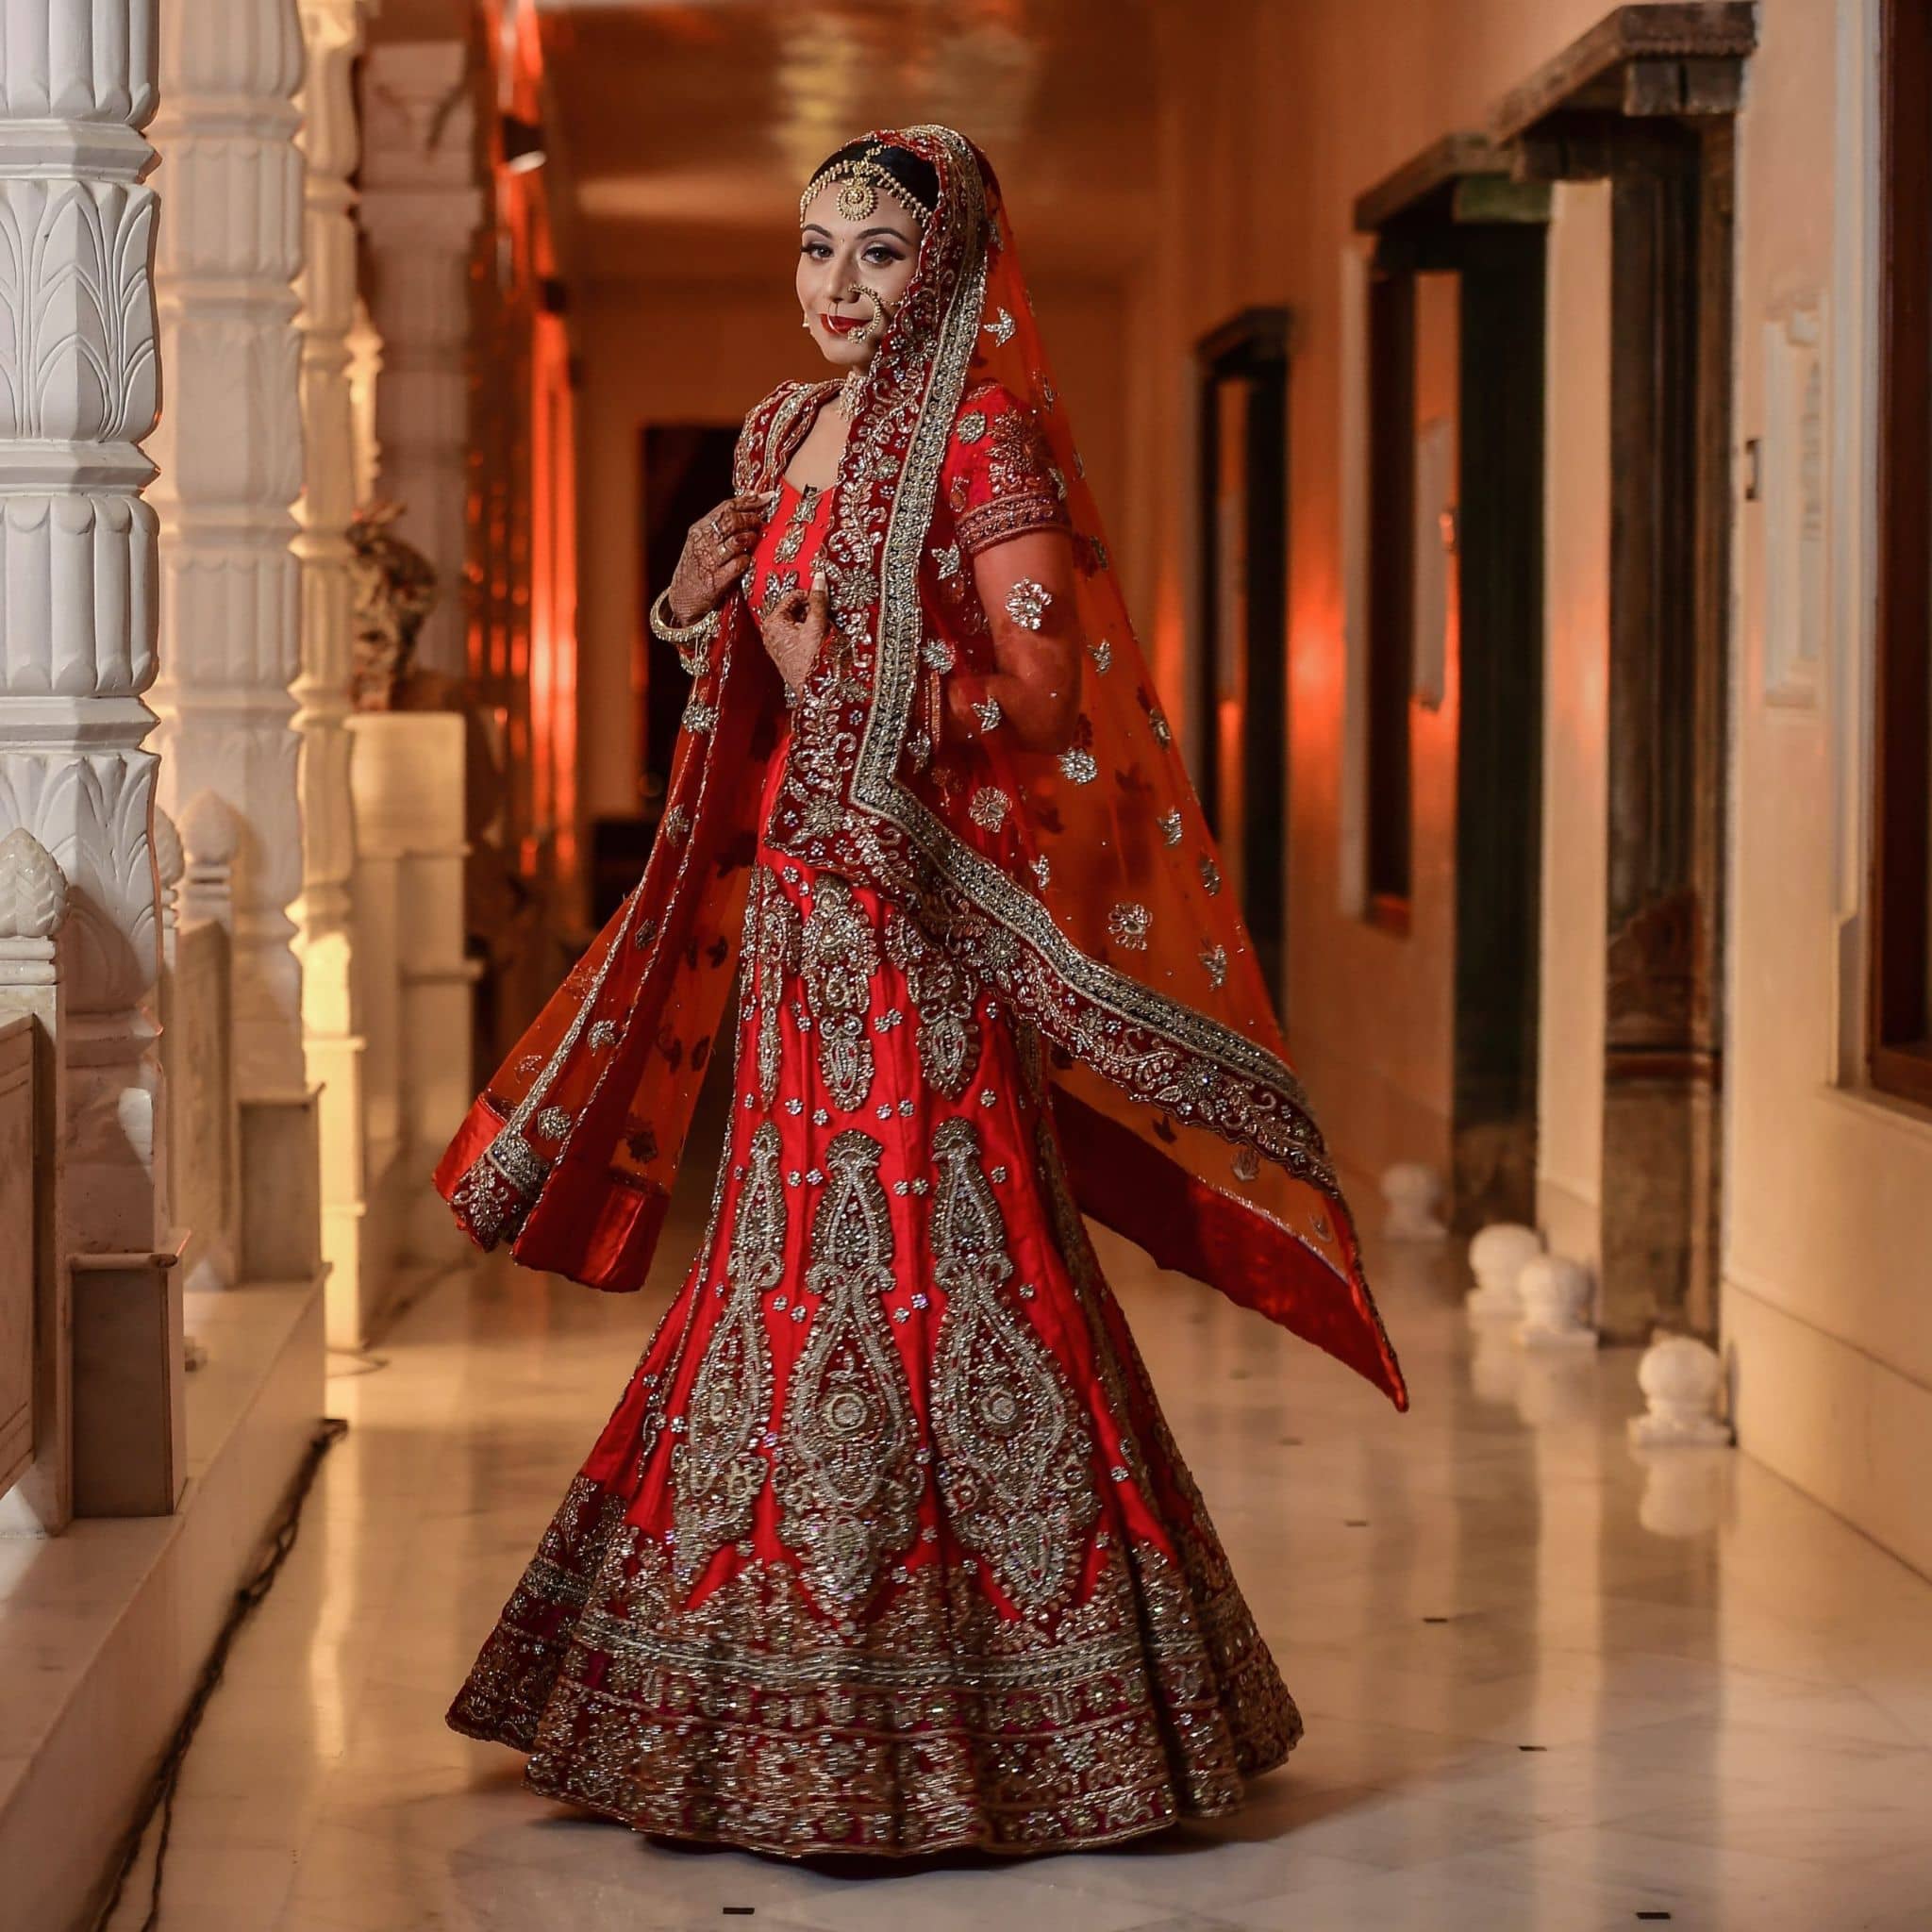 Morning Punjabi brides and their gorgeous lehengas - Get Inspiring Ideas  for Planning Your Perfect Wedding at fabweddings